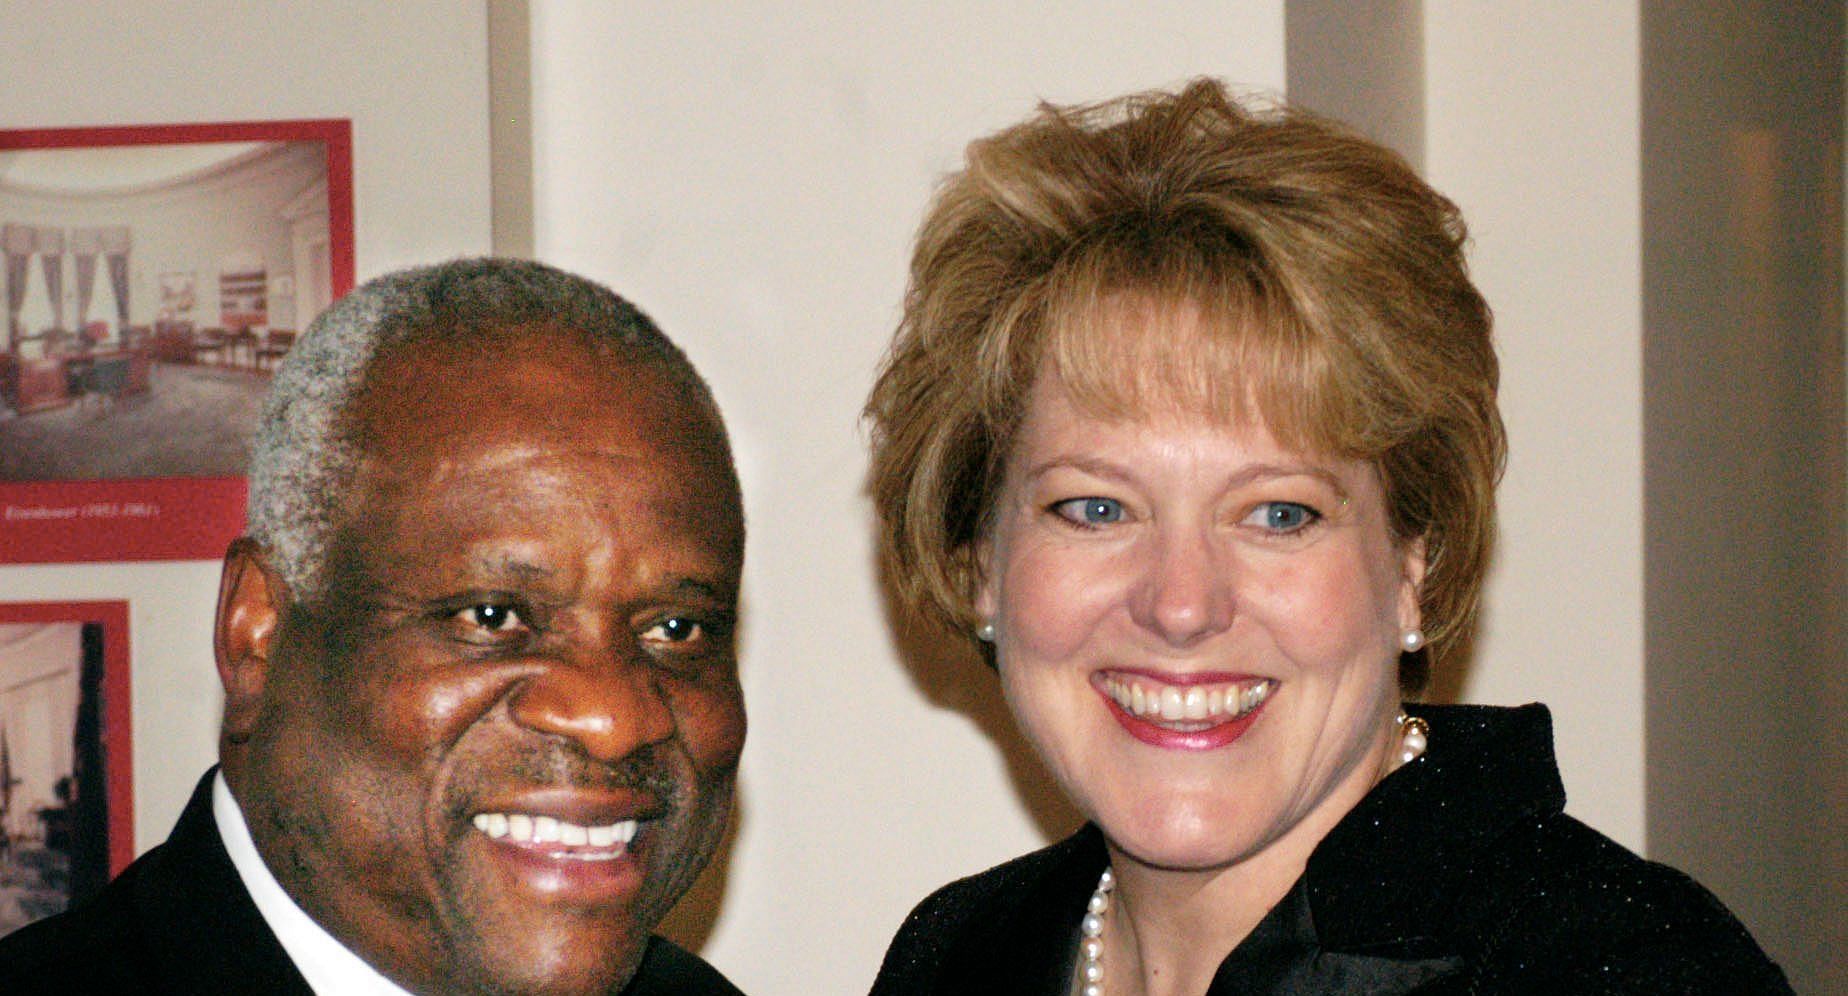 Ginni Thomas married Supreme Court Associate Justice Clarence Thomas in 1987 (Image via Gerald Martineau/Getty Images)